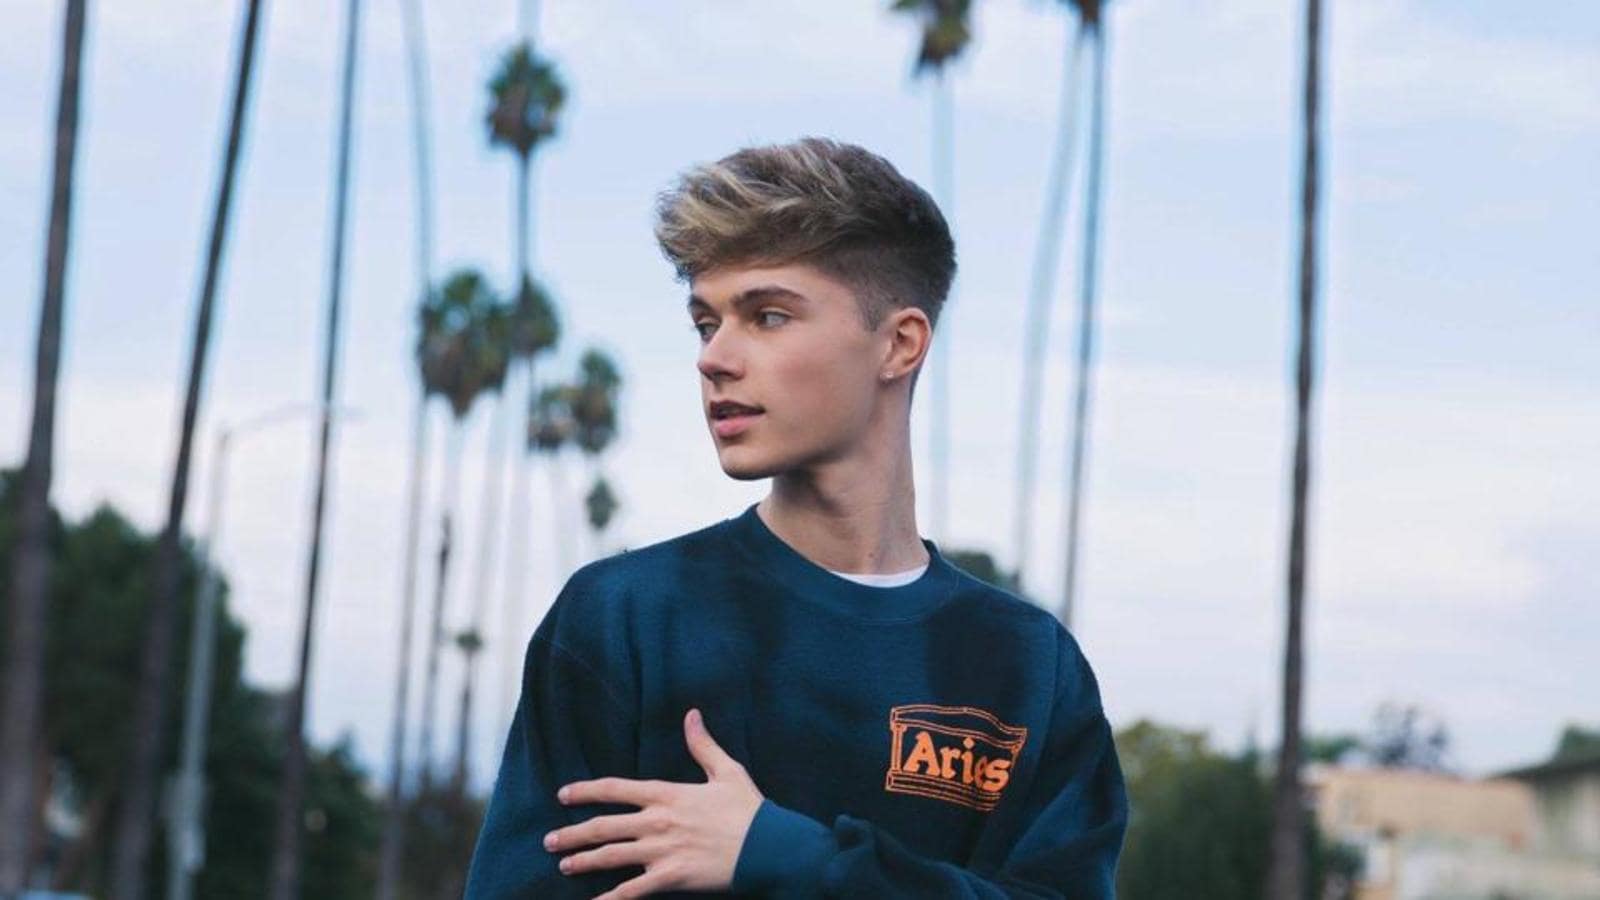 English singer HRVY Now, touring internationally will be hard, but I